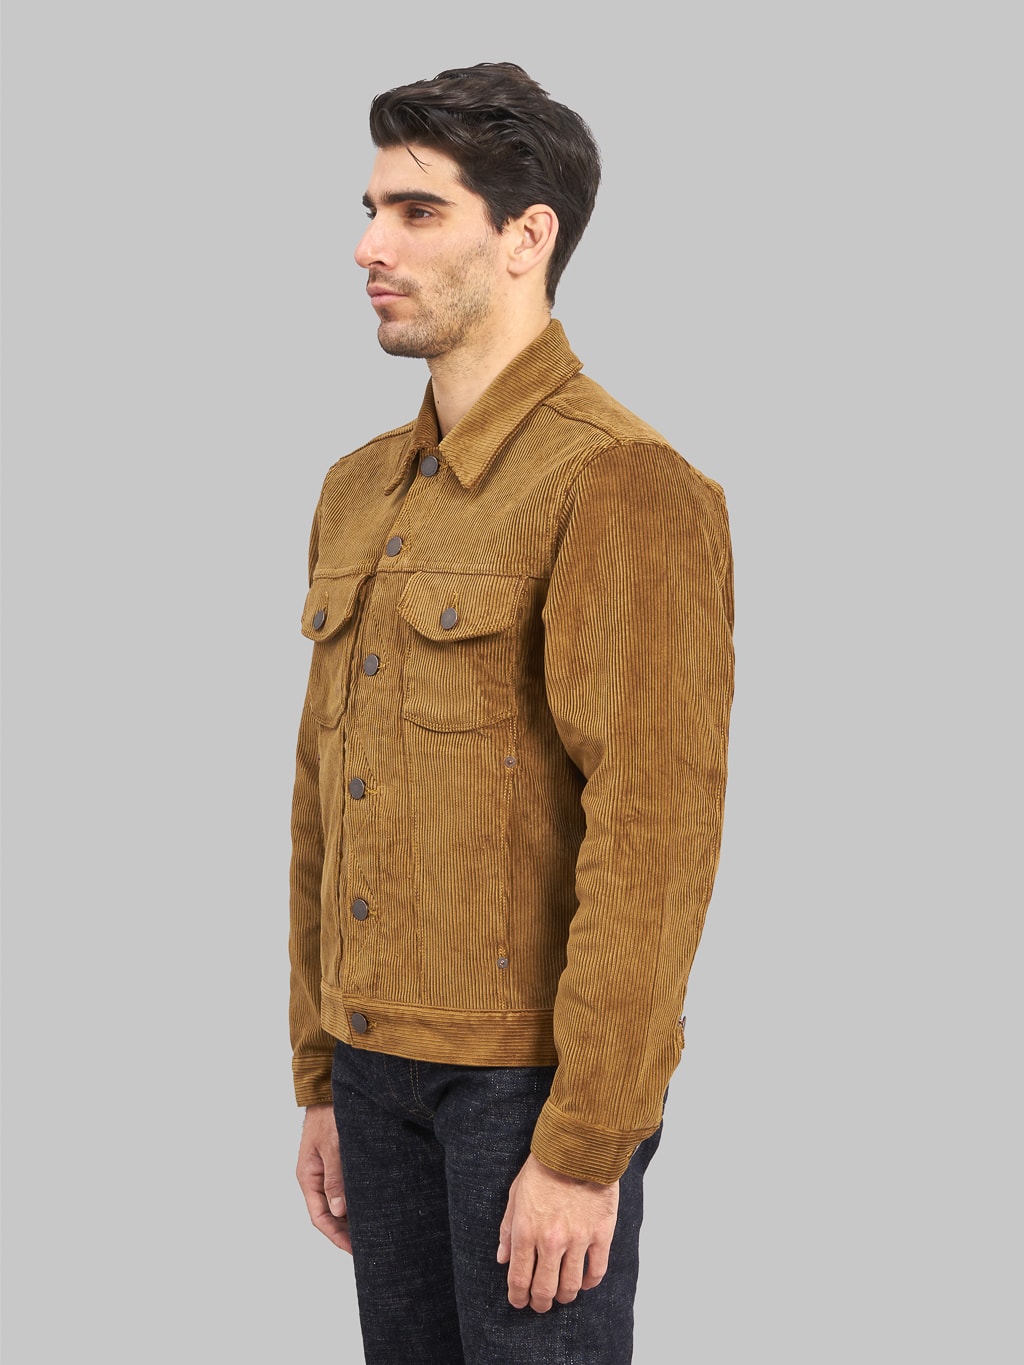 Freenote Cloth Classic Jacket Gold Corduroy  model side fit